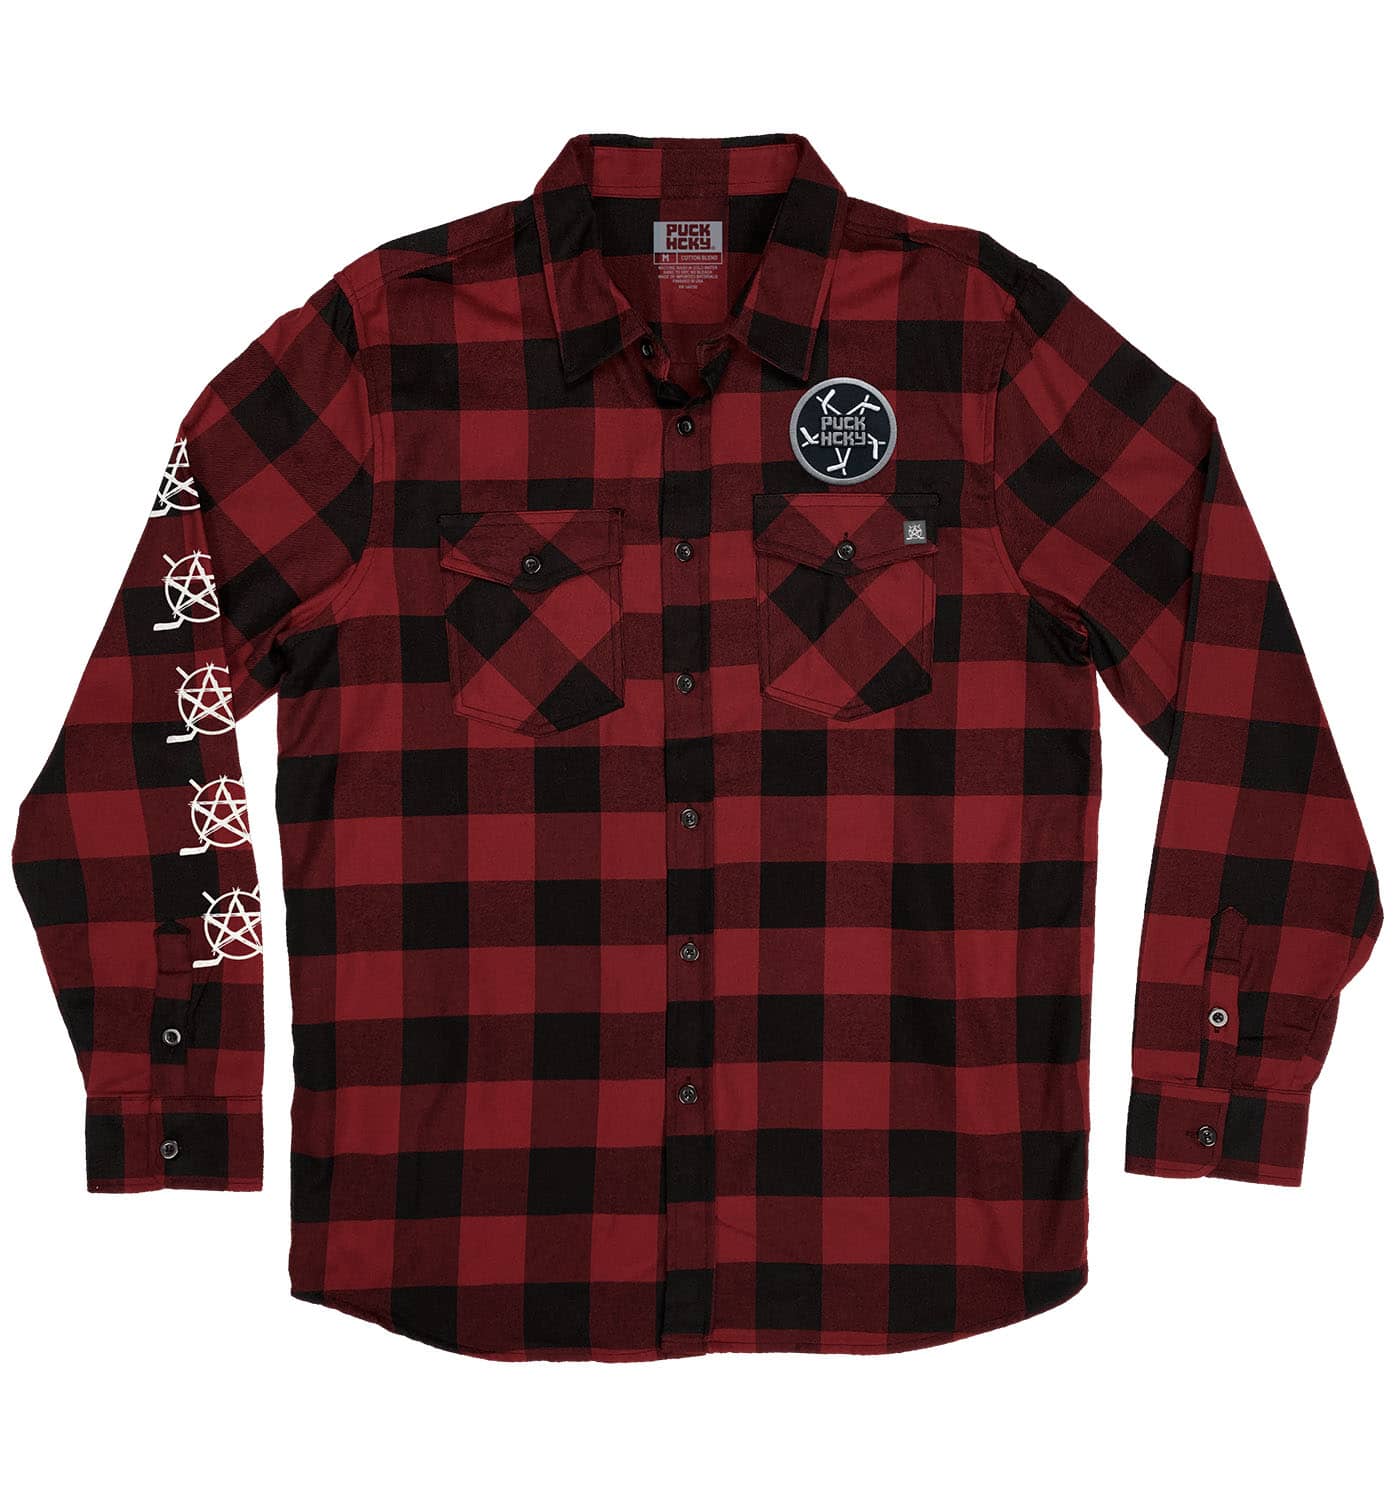 PUCK HCKY 'PENTASTICK’ hockey flannel in red and black front view